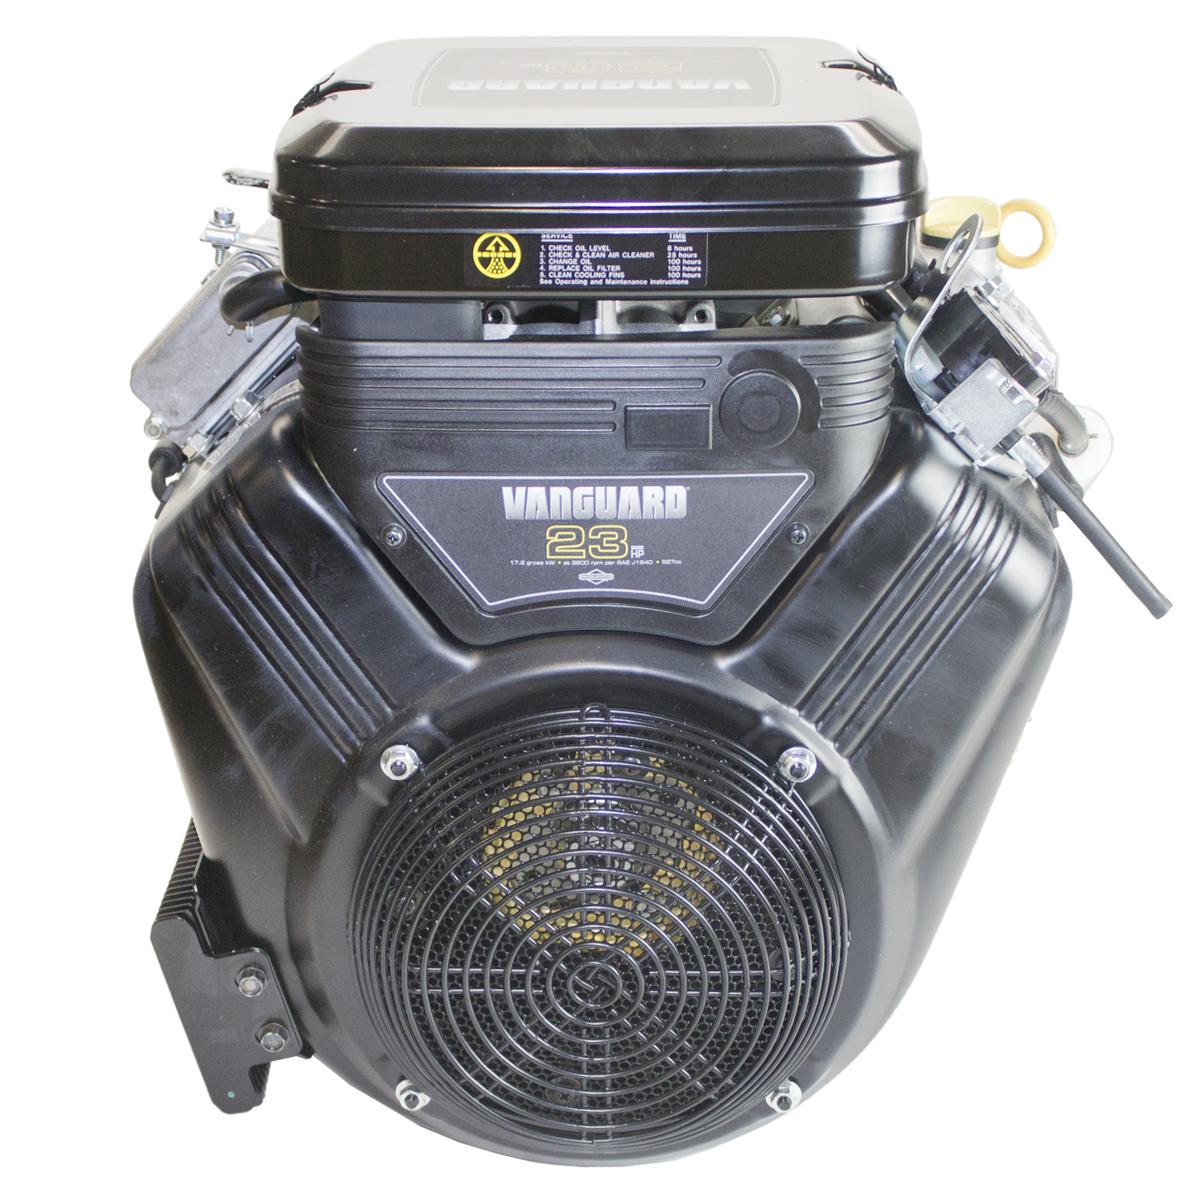 23hp Vanguard, Horizontal 10:1 Tapered Shaft, Electric Start, FP, Oil Filter Cooler, Briggs Stratton Engine